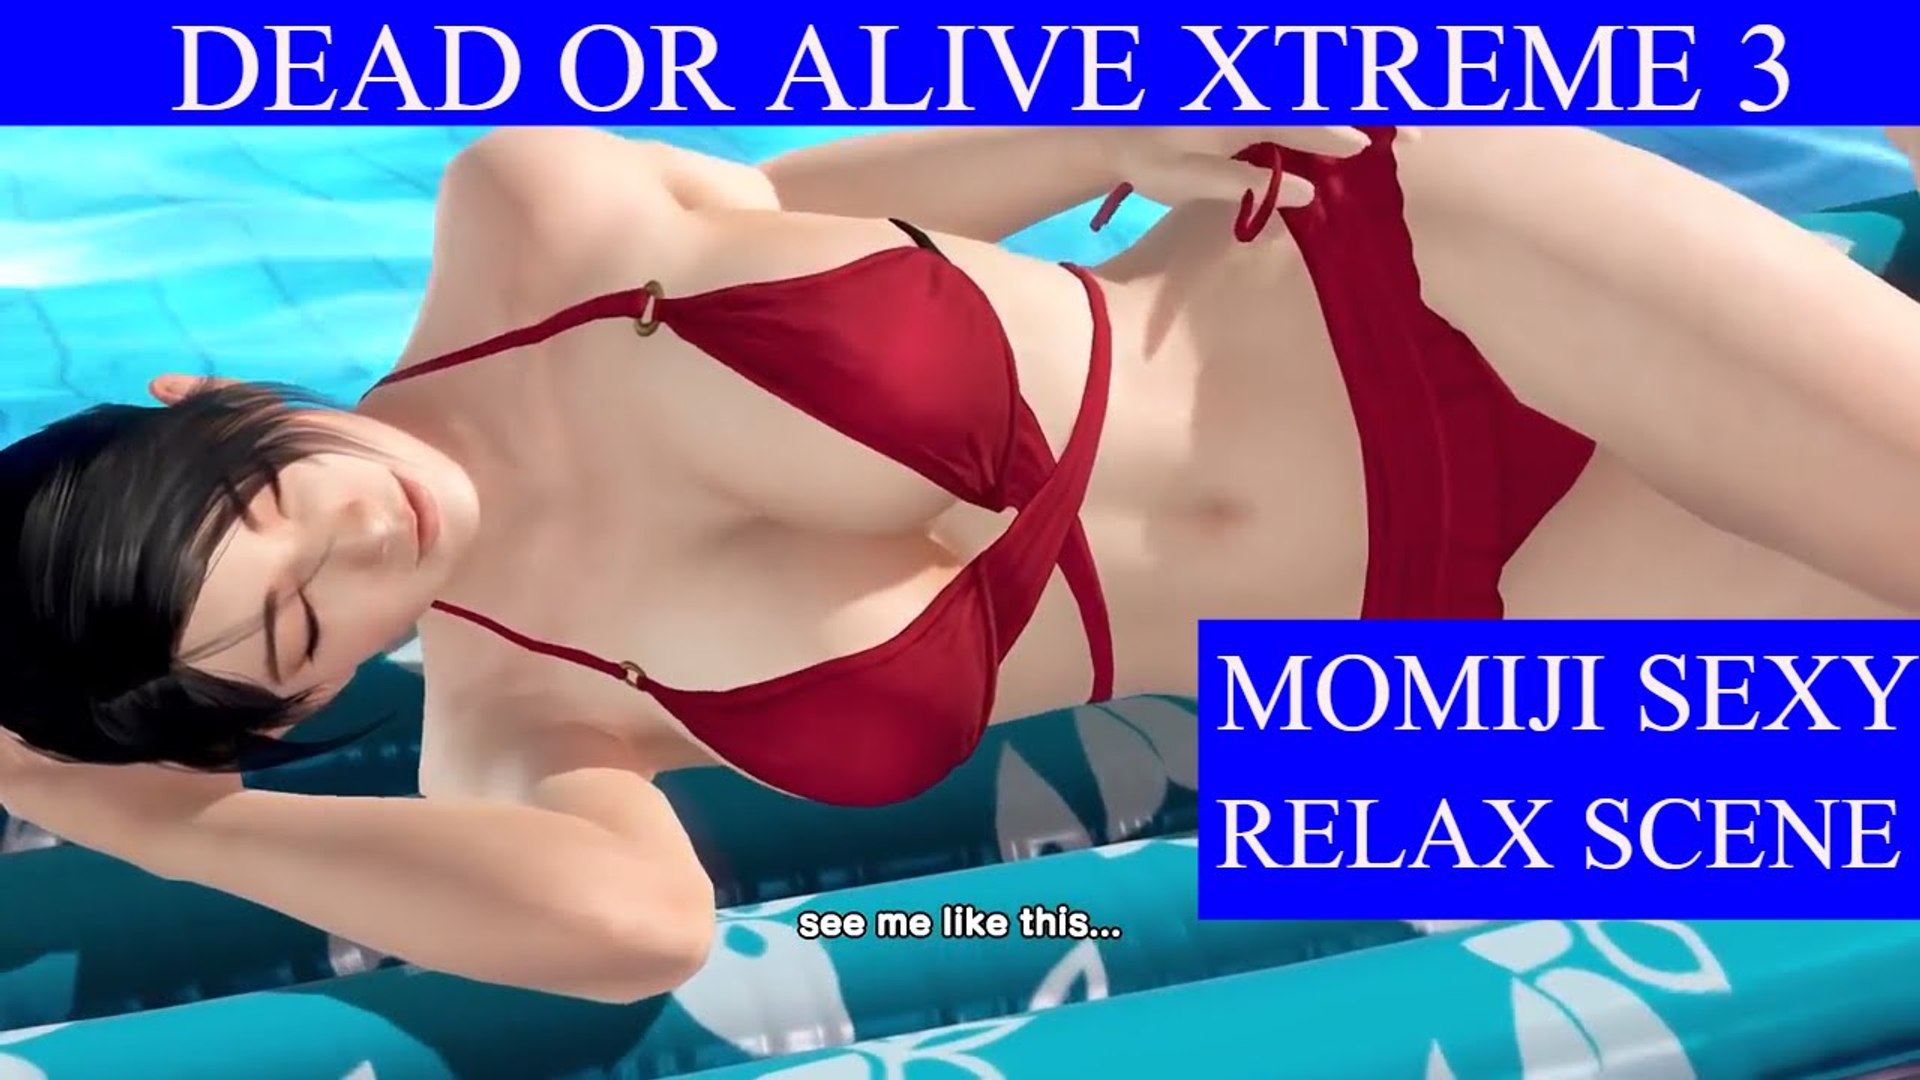 Dead or Alive Xtreme 3 - Momiji Sexy Relax Scenes (PS4) - video Dailymotion